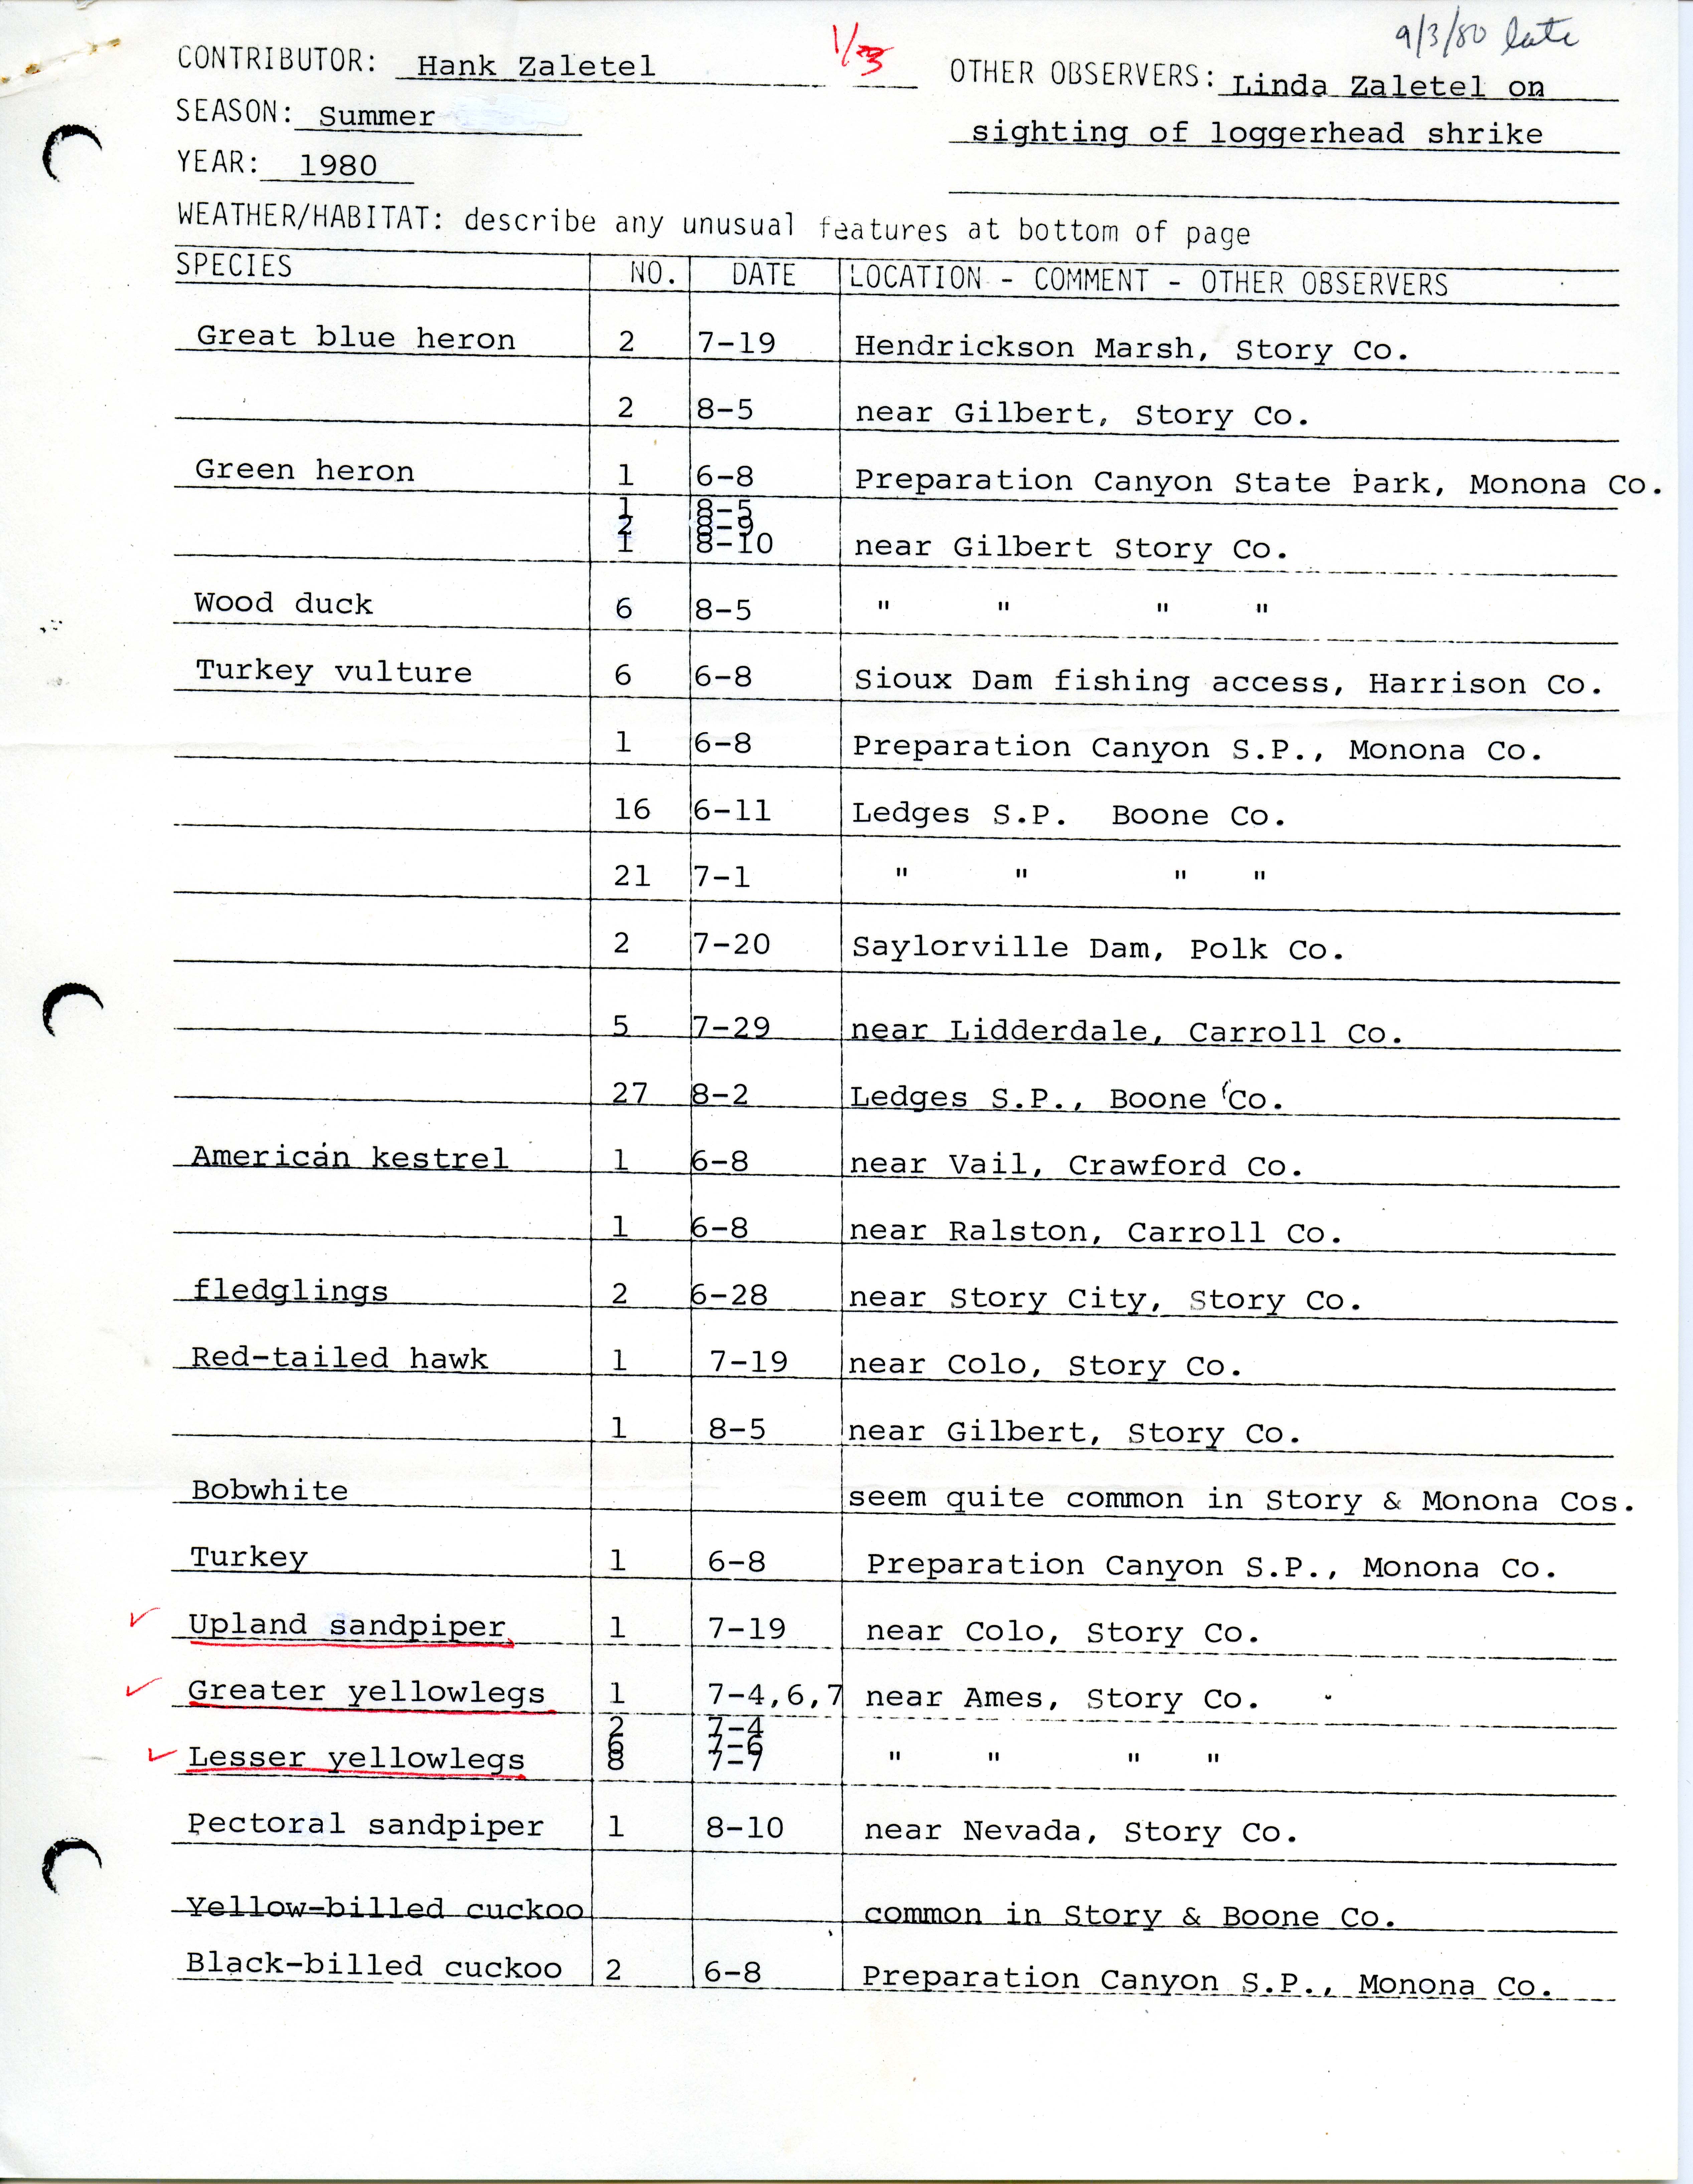 Field notes contributed by Hank Zaletel, summer 1980